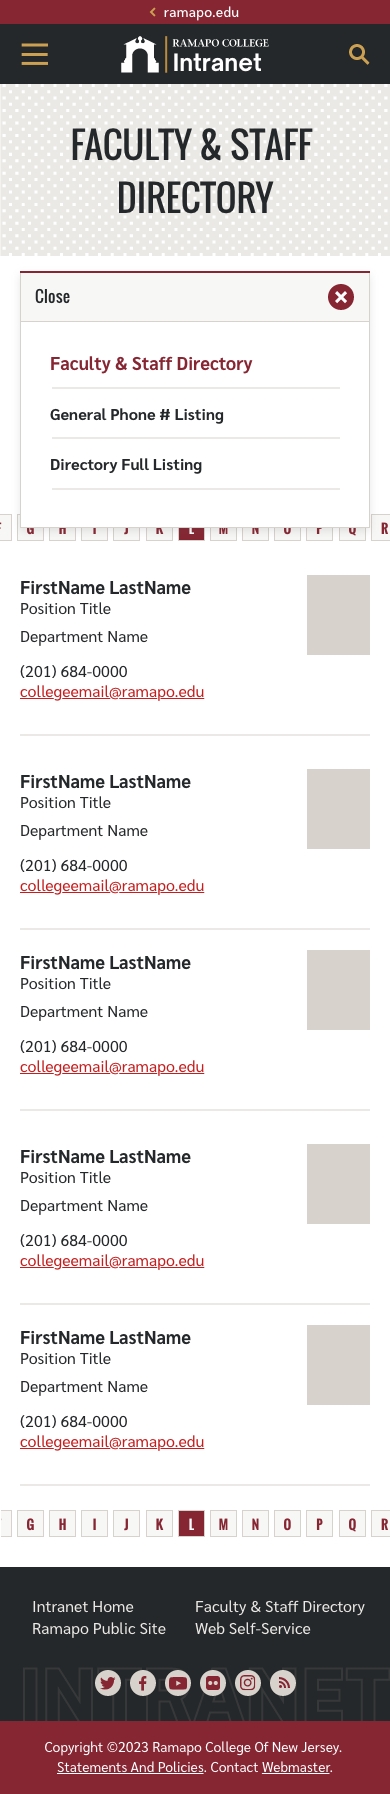 Faculty & Staff Phone/Contact Directory: Submenu Open